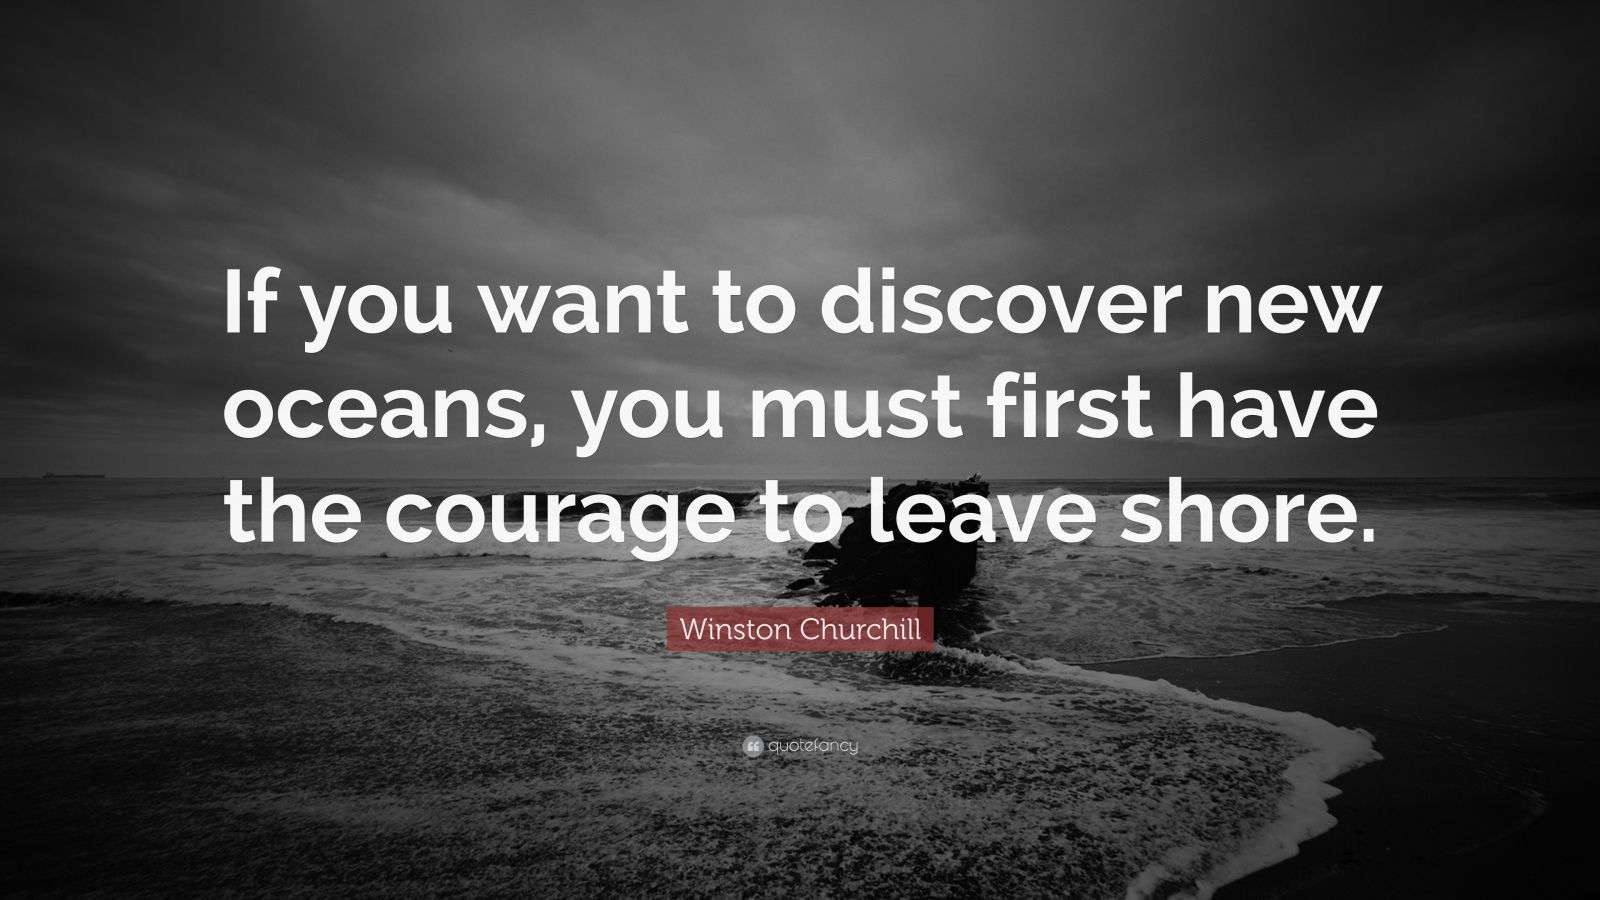 Winston Churchill Quote: “If you want to discover new oceans, you must ...